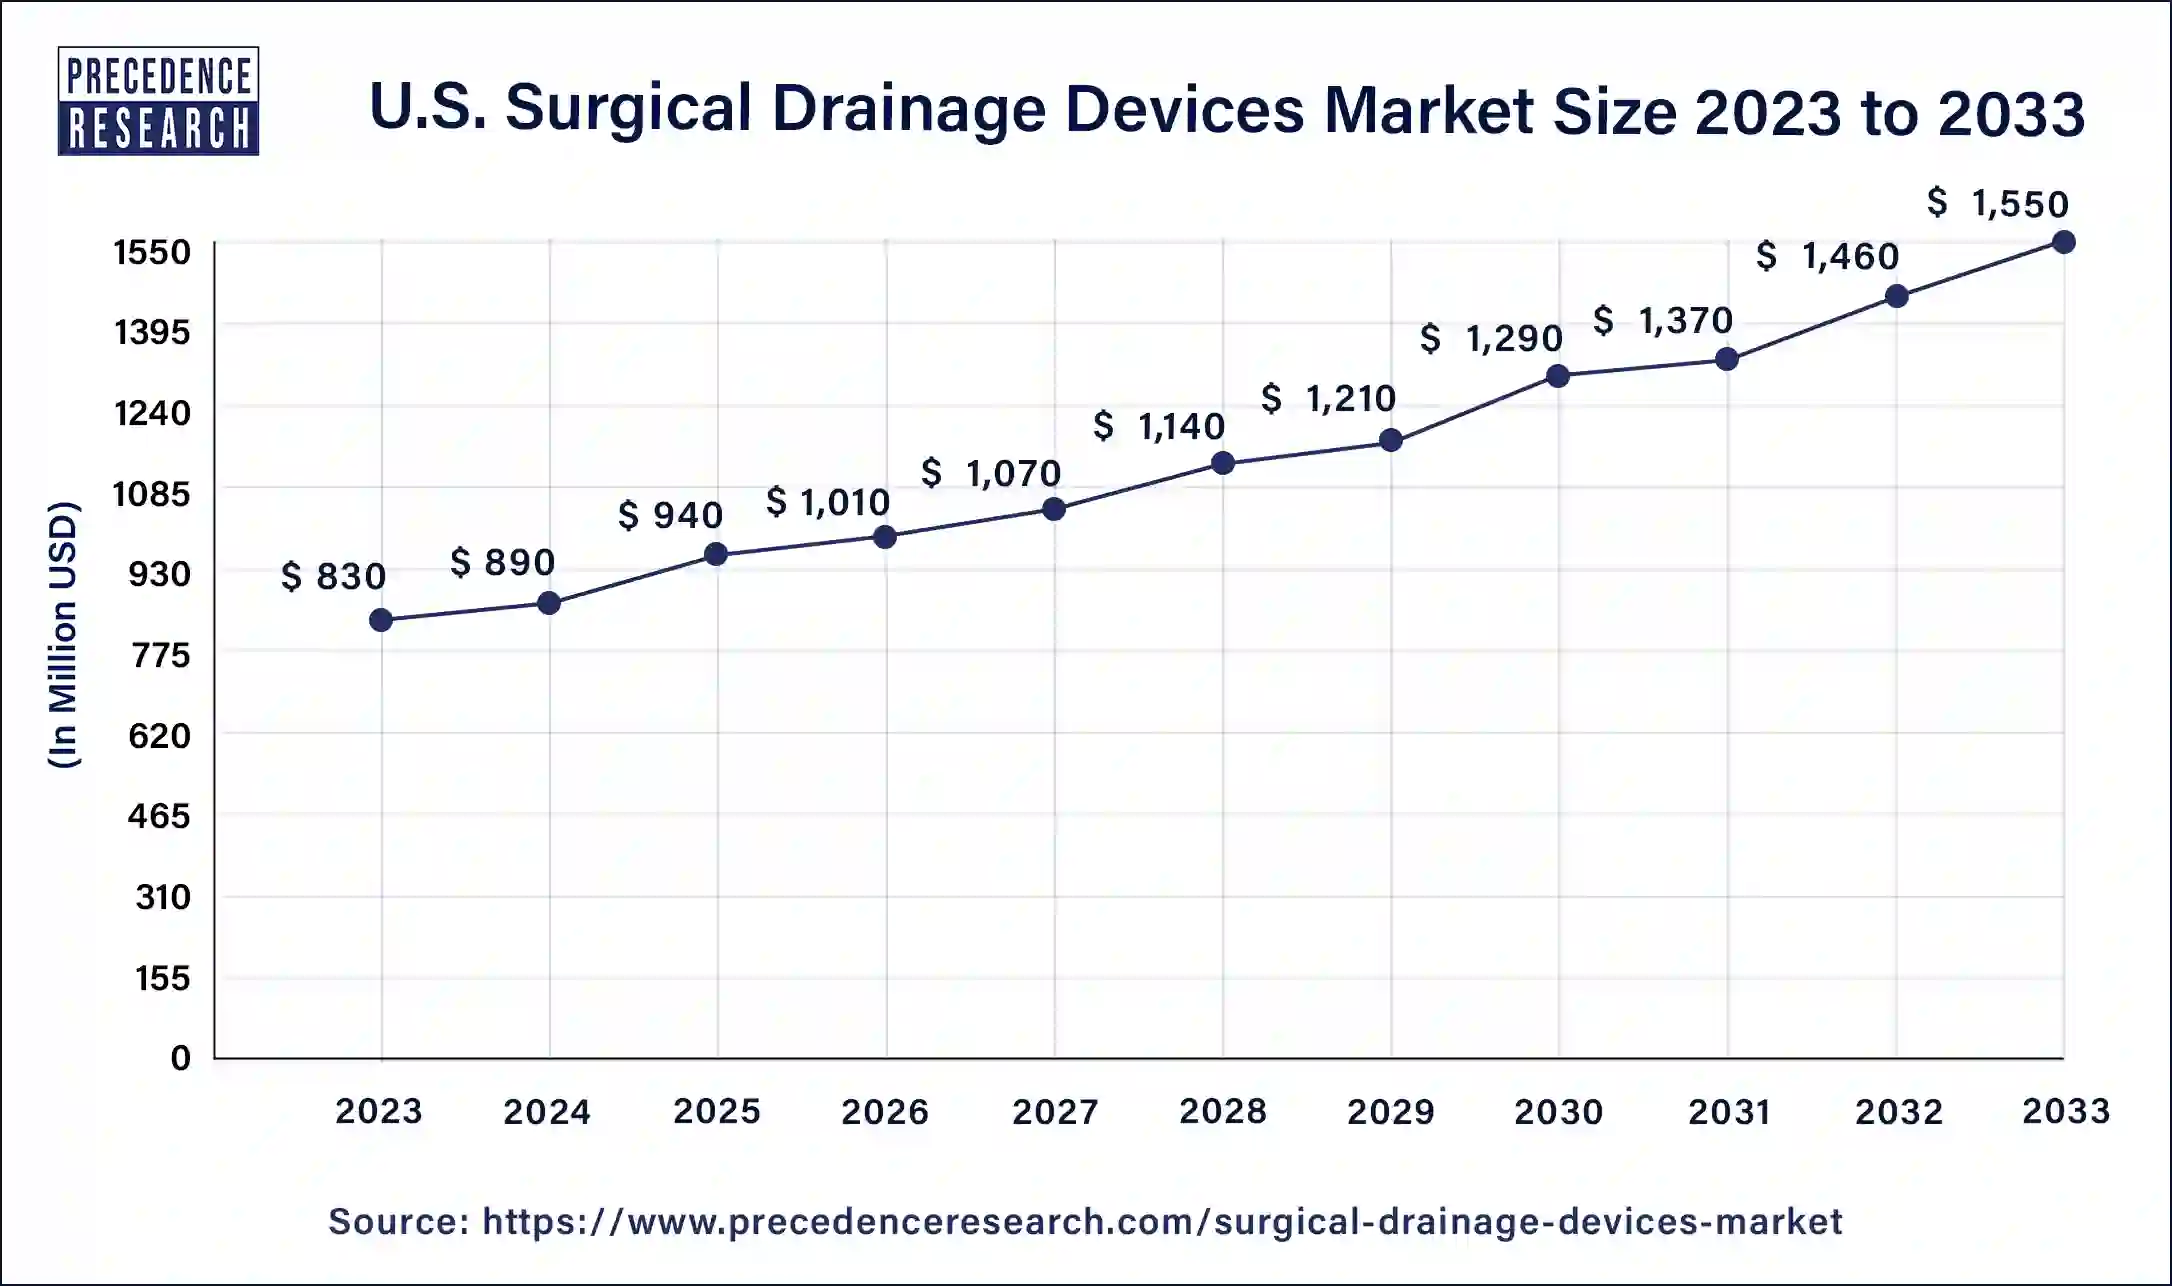 U.S. Surgical Drainage Devices Market Size 2024 to 2033